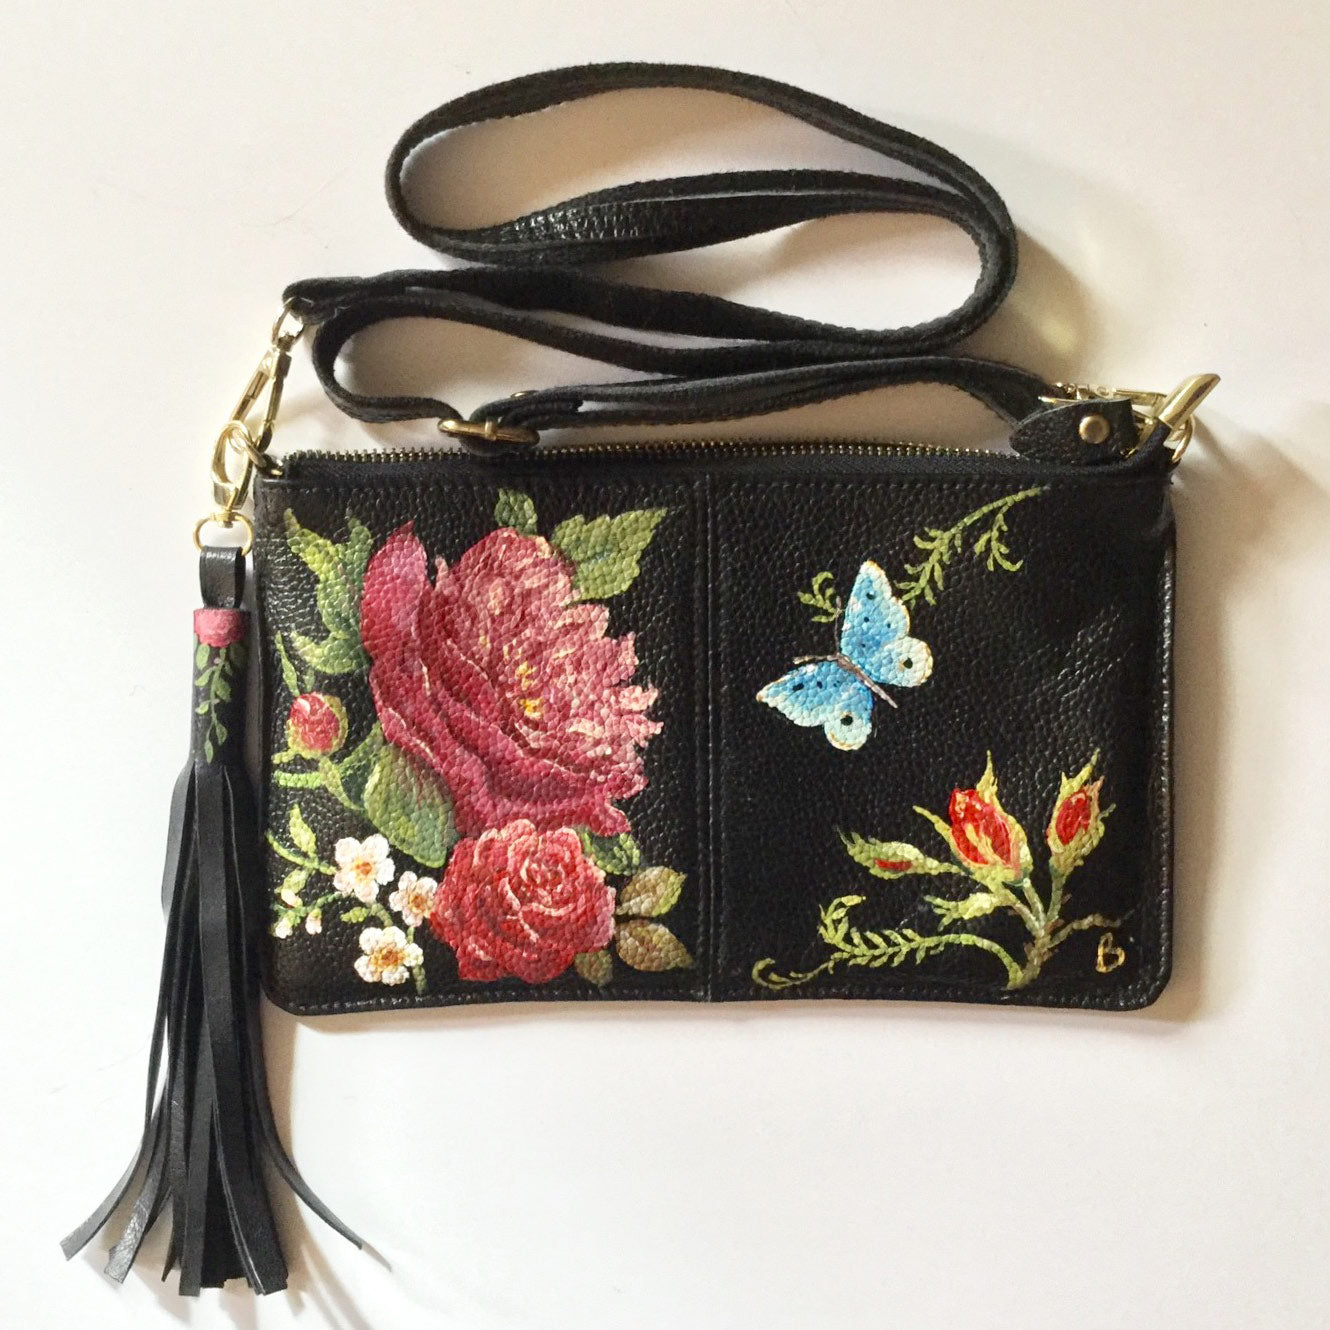 Hand Painted Black Leather Handbag Clutch With Top Handle and 